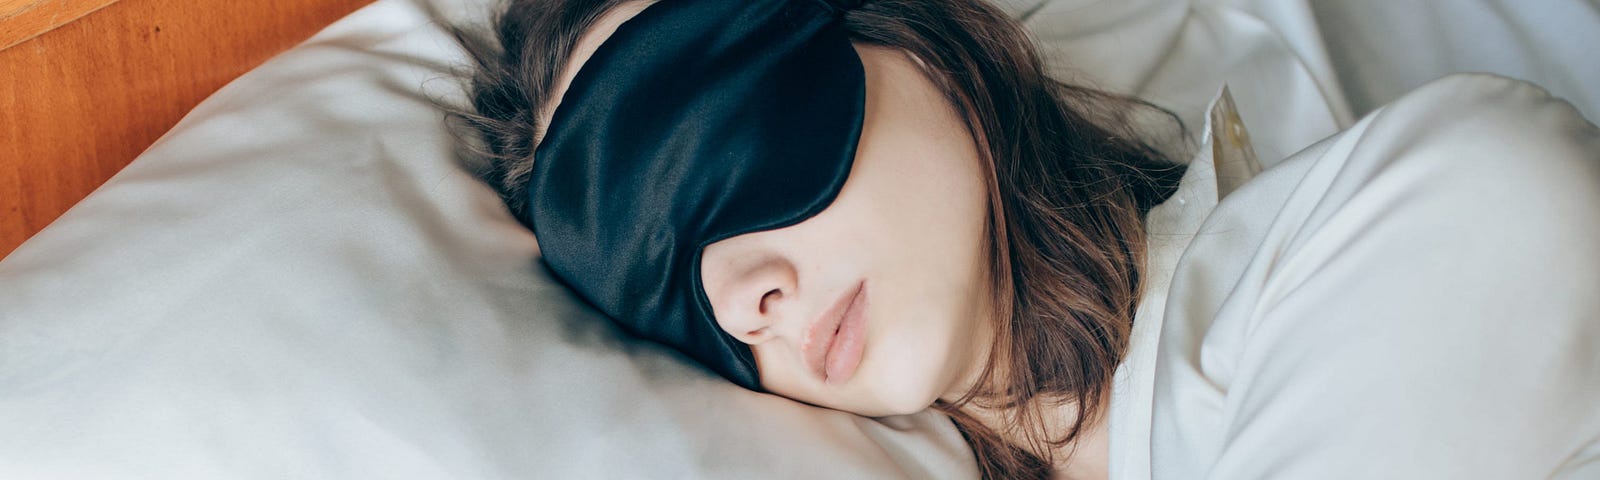 A woman wears a sleeping mask while in bed.